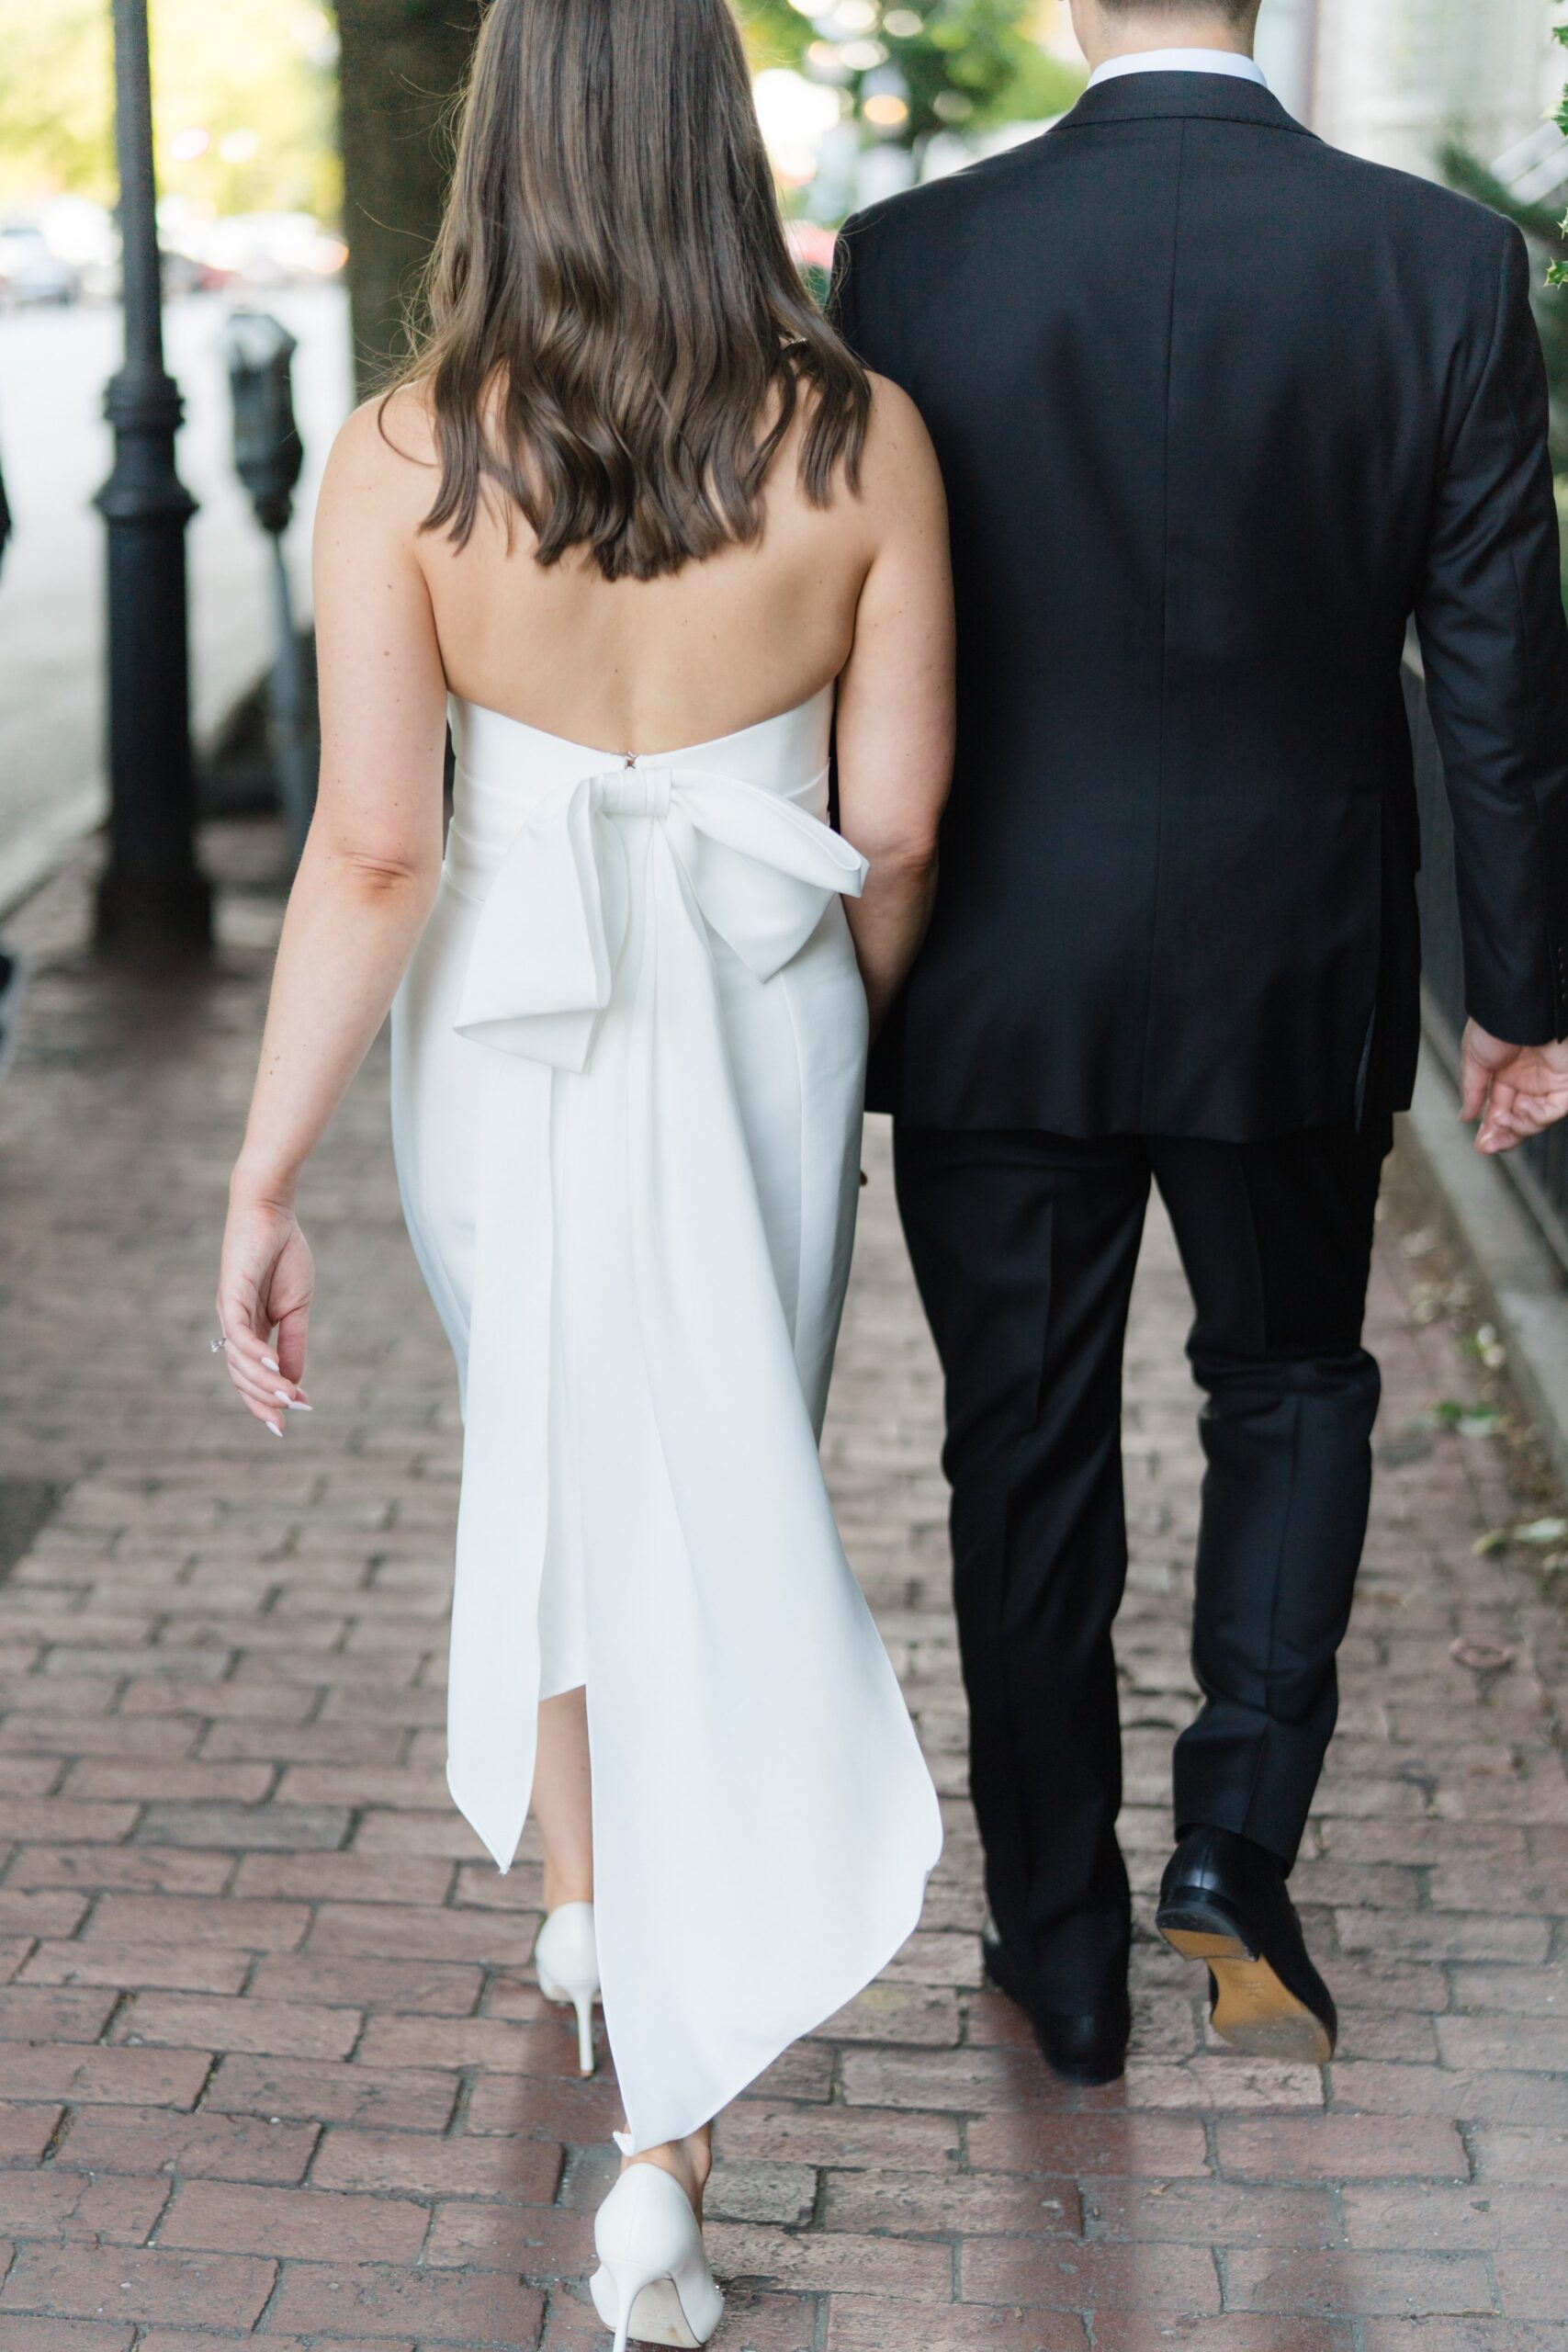 Rehearsal dinner dress for bride with big bow flowing in the wind. Bride and groom holding hands walking down the street.